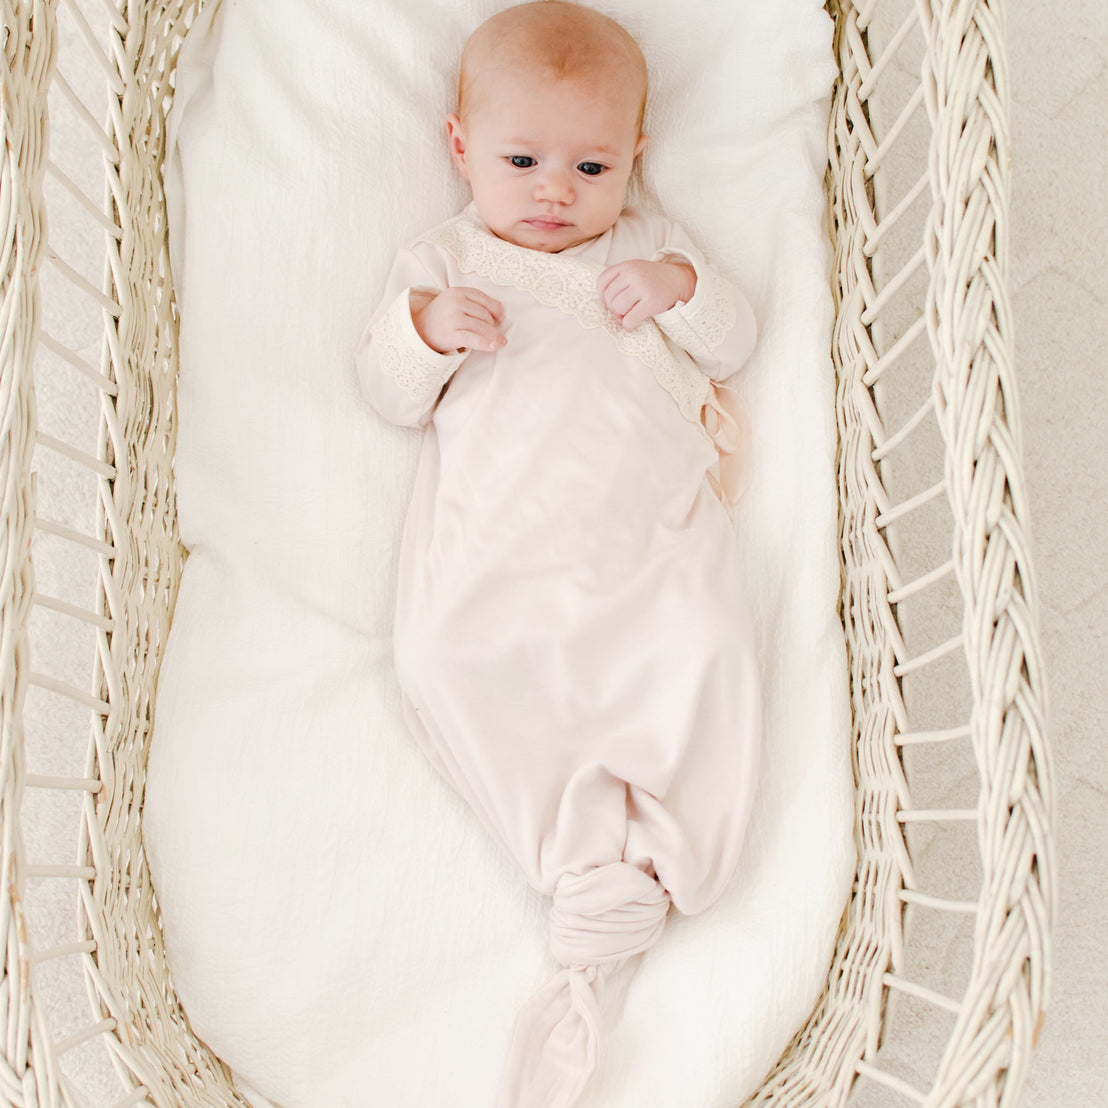 A newborn wearing the Evelyn Knot Gown lies in a white woven bassinet, looking upward with a calm expression. The soft colors and light create a serene atmosphere.